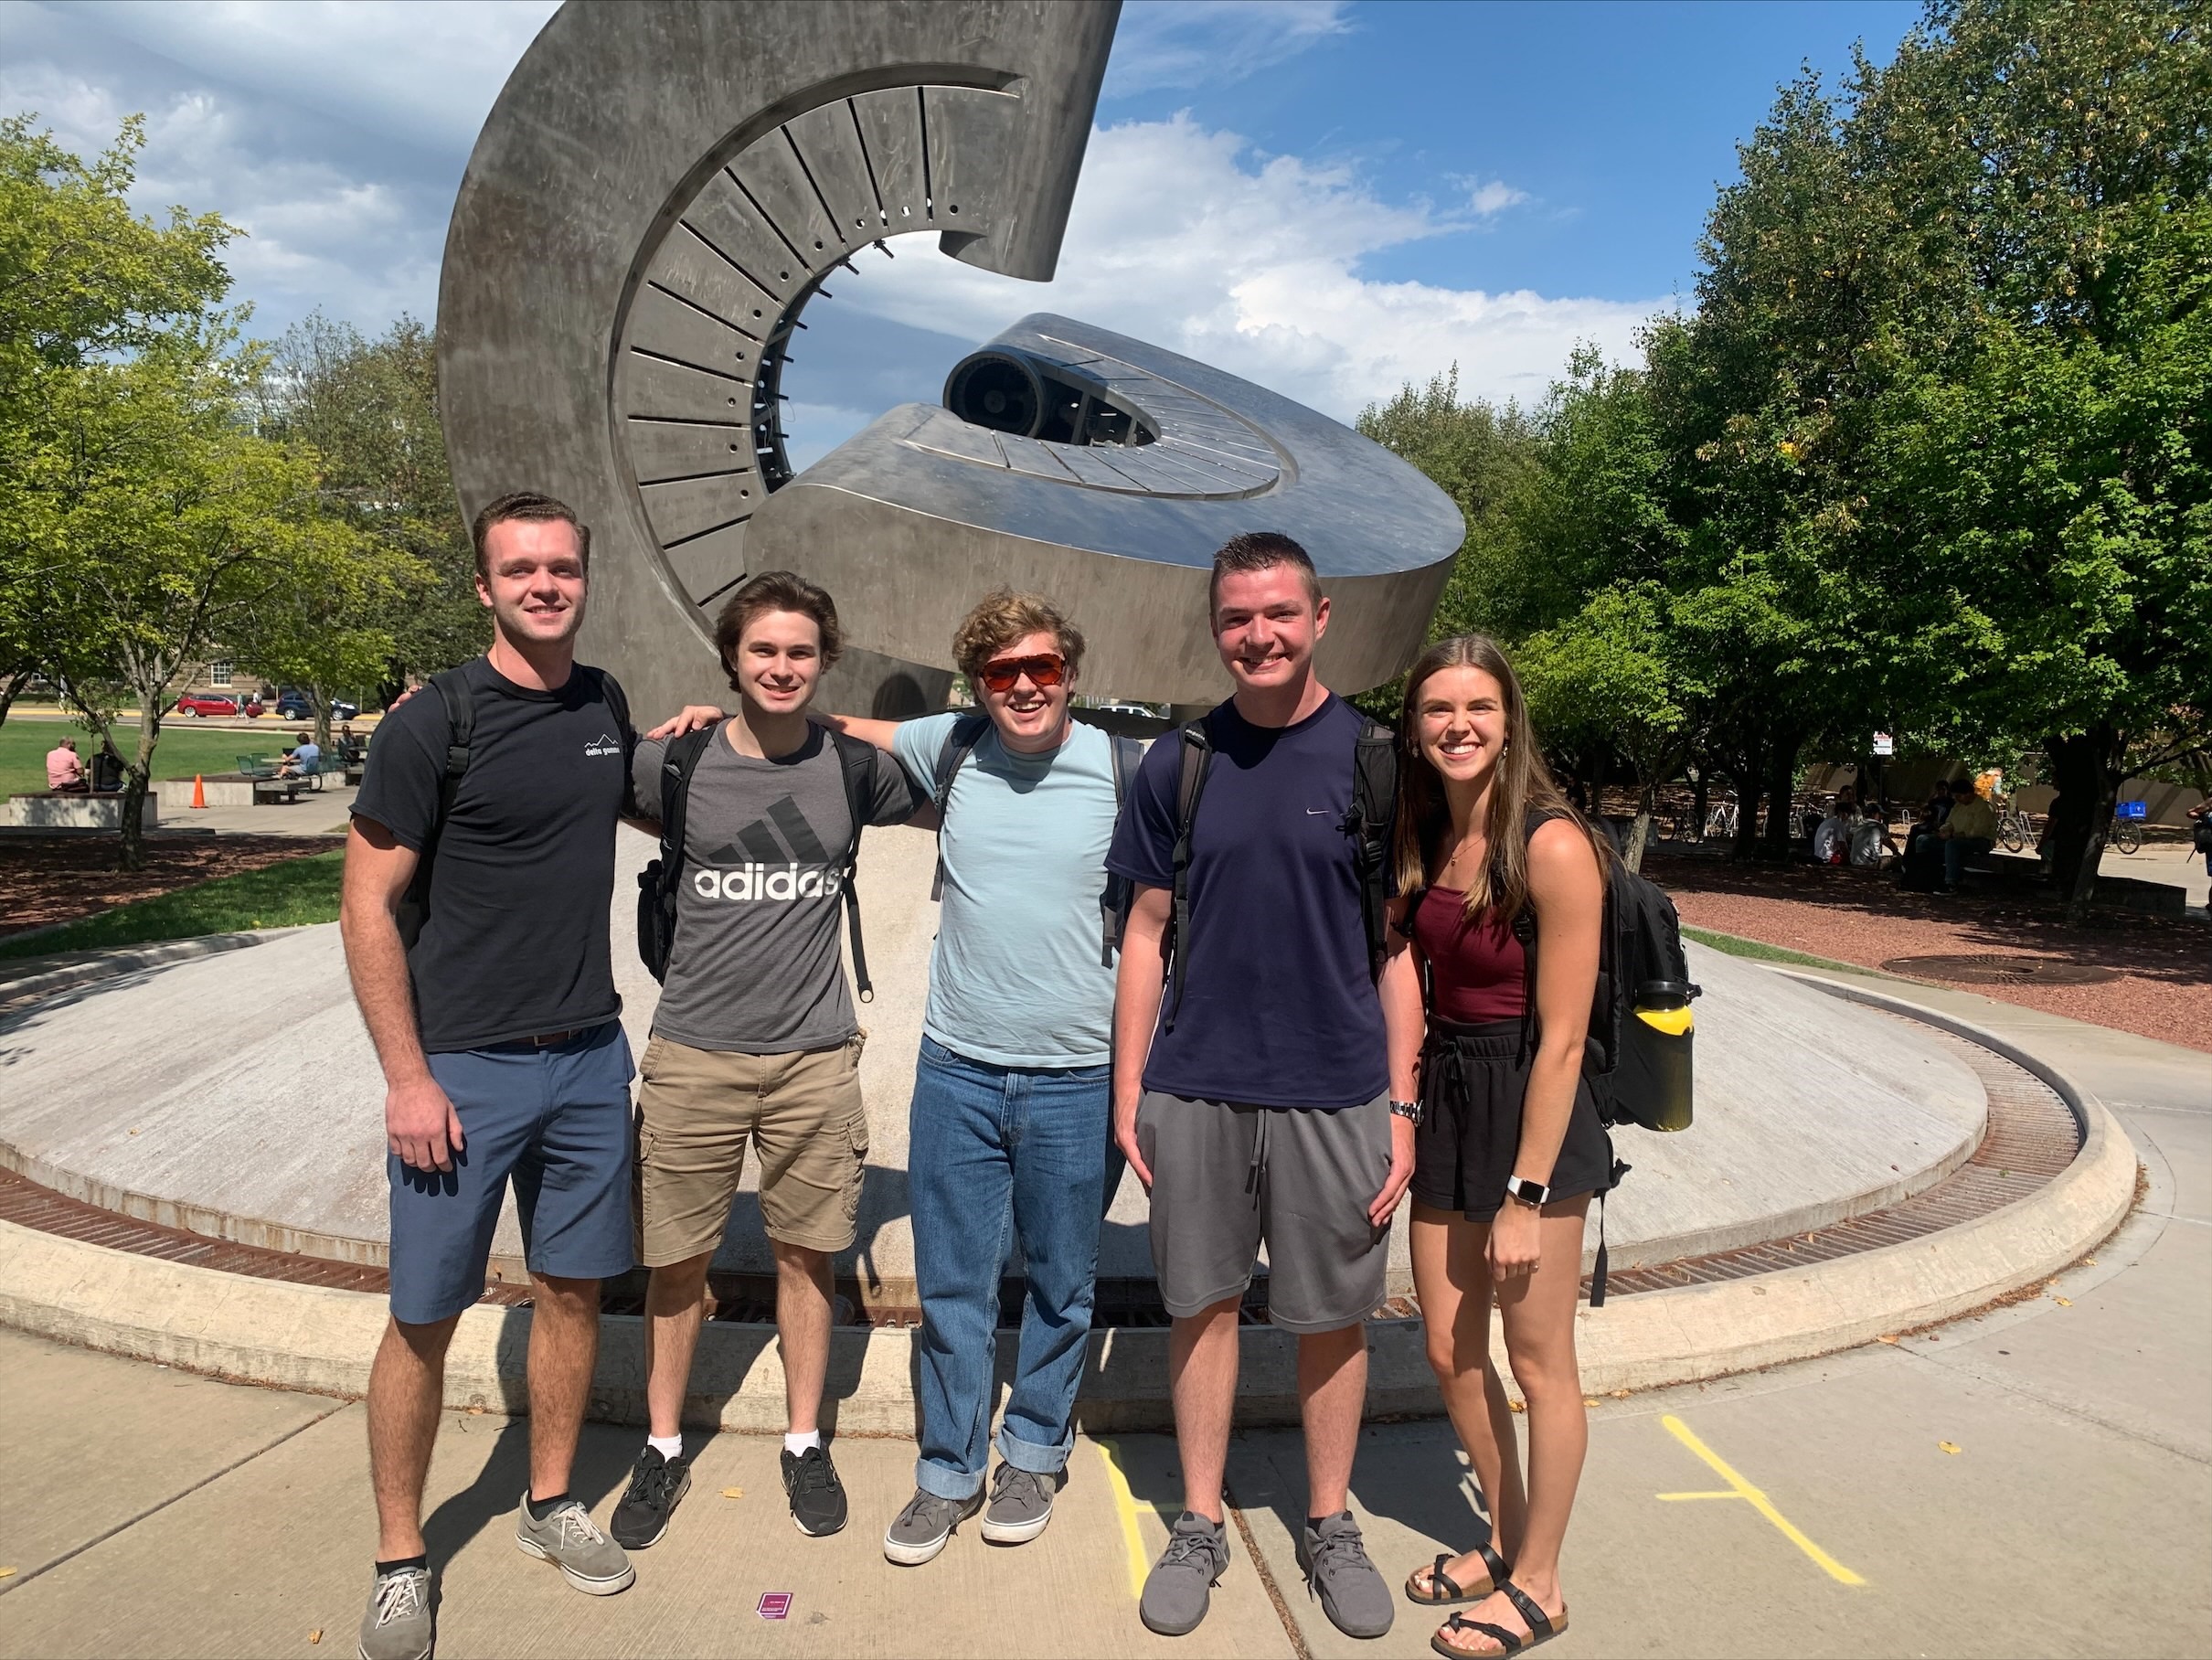 The project team (left to right): Matthew Voigt, Jonathan Izban, Christopher Wiegand, Max Christopherson, and Sydney Heimer